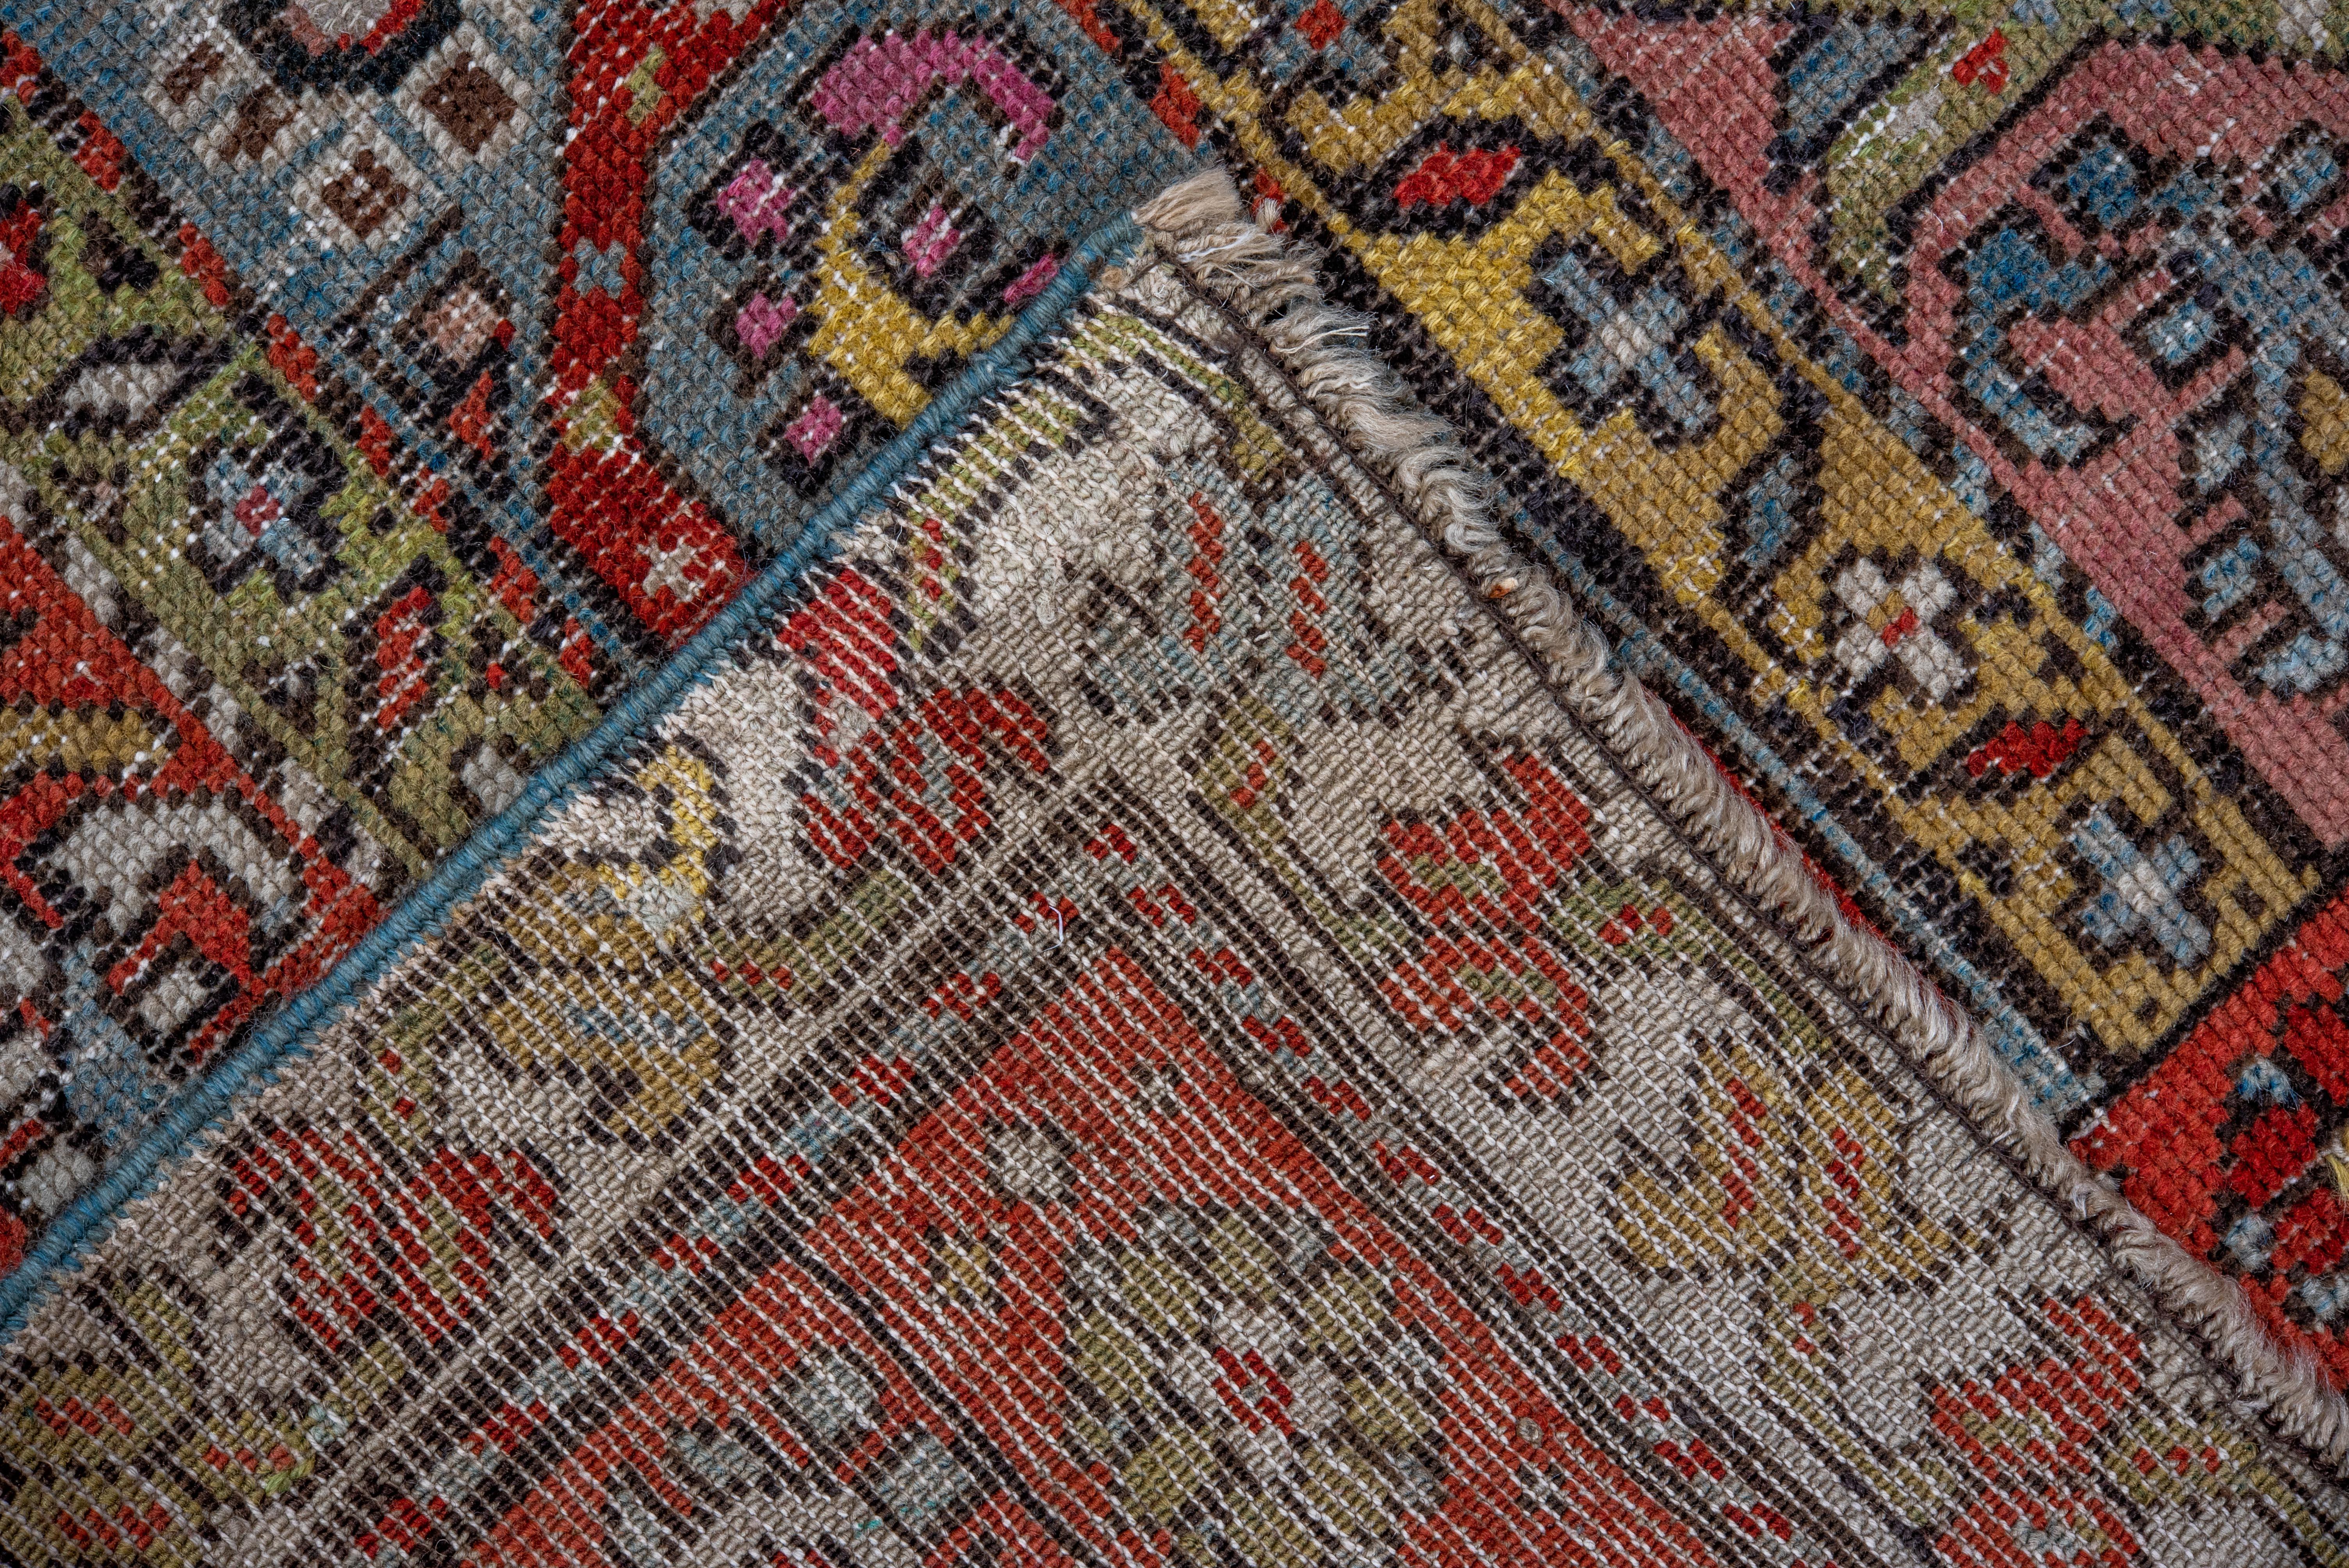 Tribal Village Persian Rug Mid 20th Century Cira 1930 in Multicolor In Good Condition For Sale In New York, NY